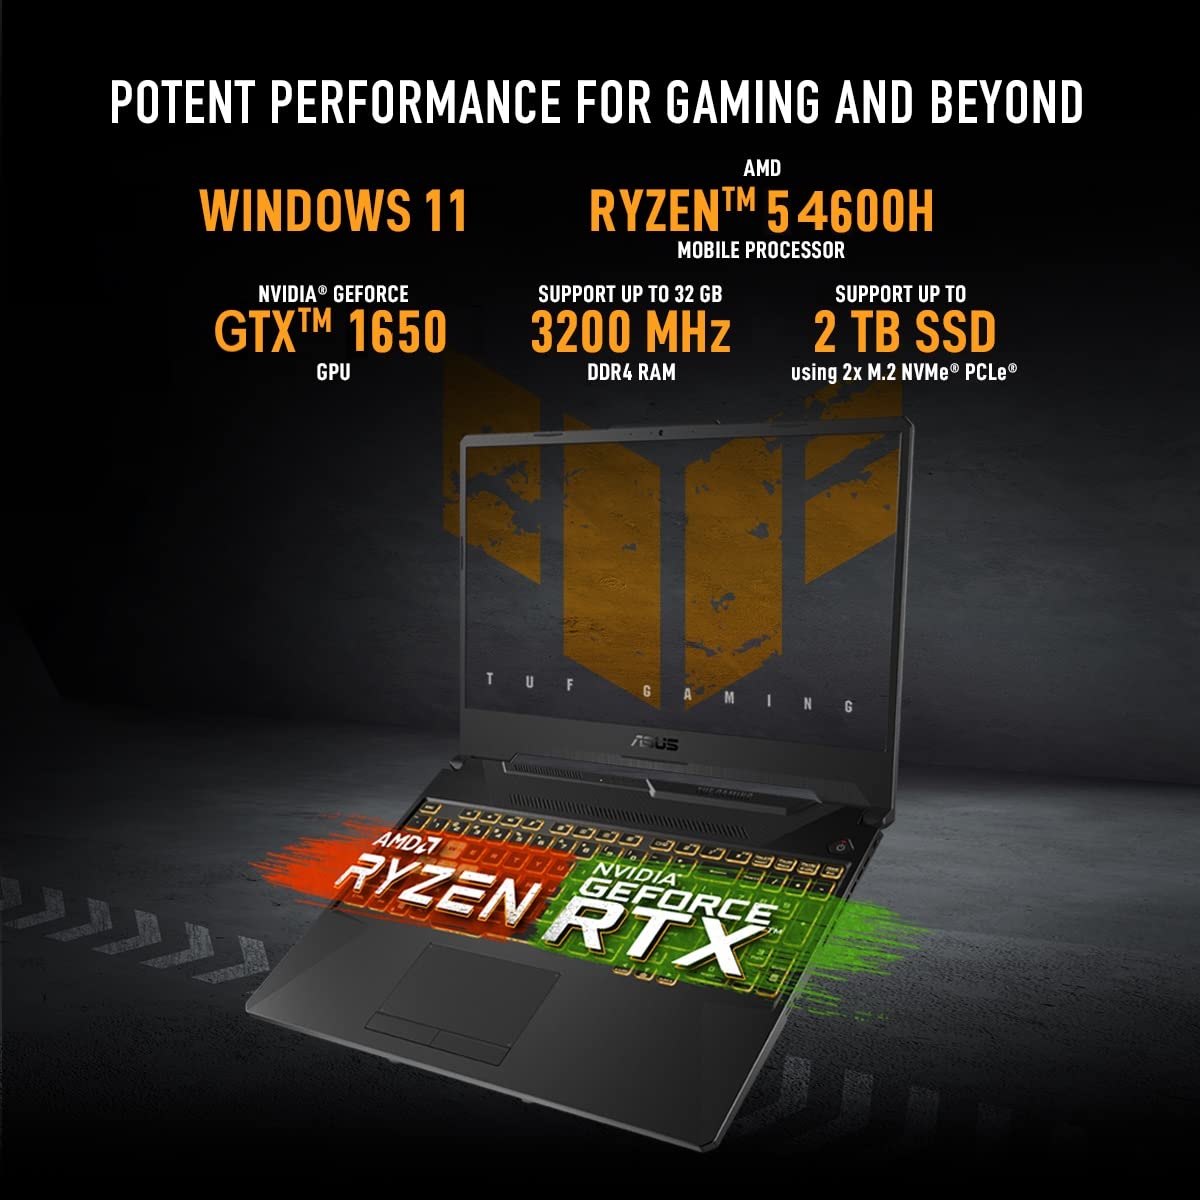 Elevate your gaming with ASUS TUF Gaming A15 - the best laptop with AMD Ryzen 5, GTX 1650.